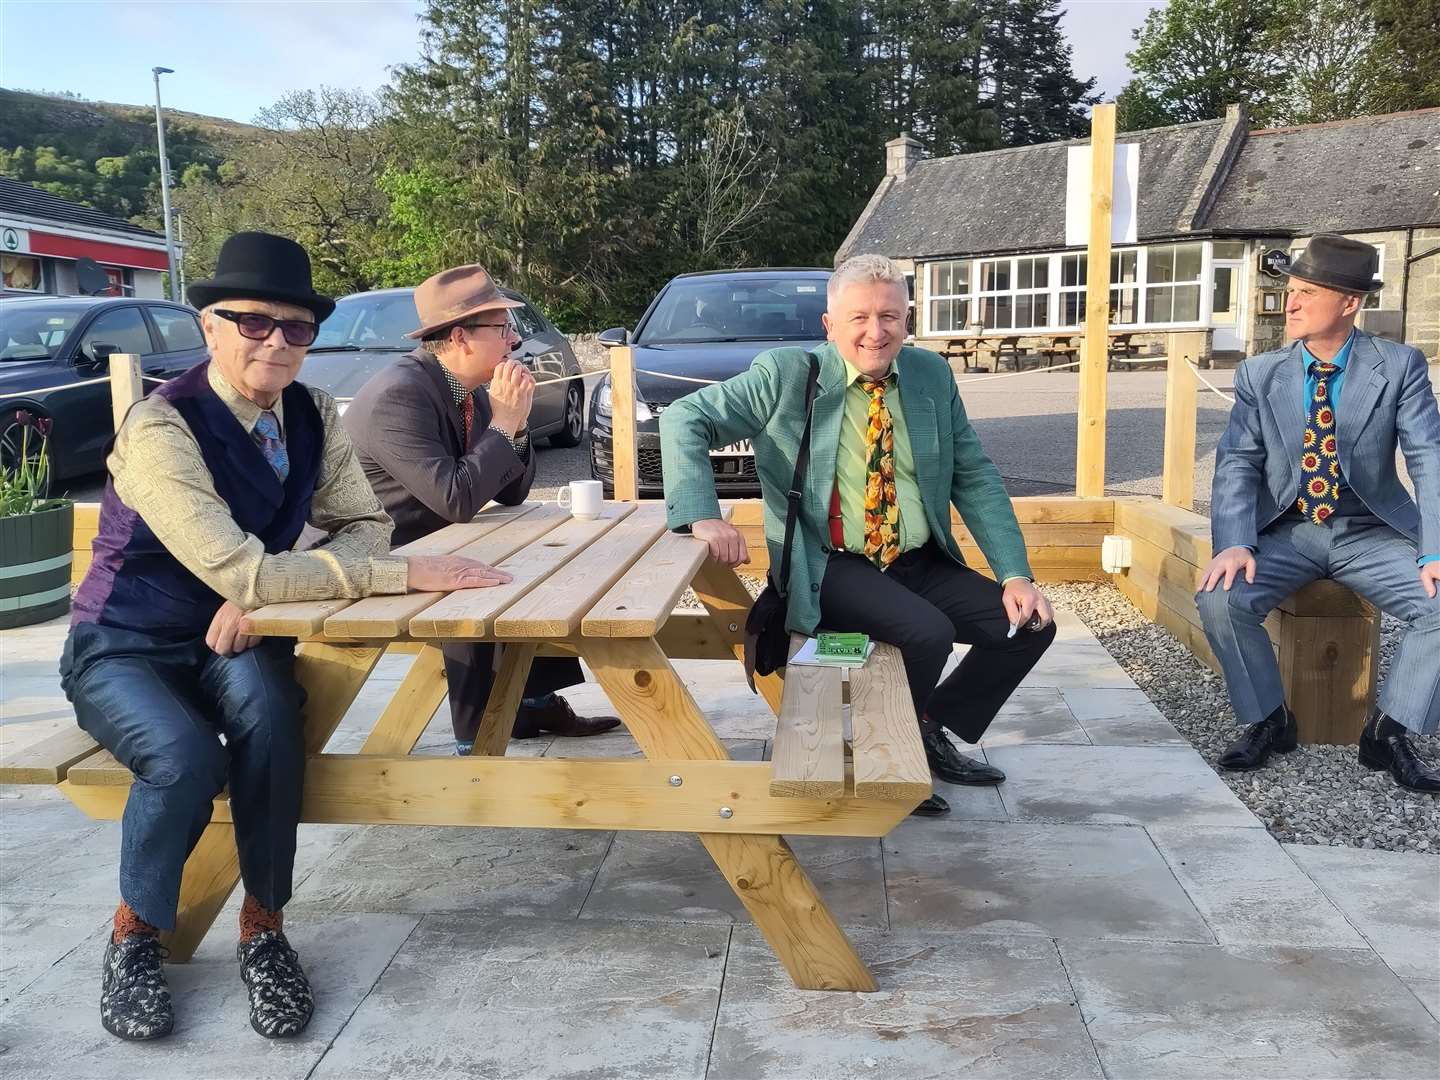 Members of the Budapest Cafe Orchestra relax outside Rogart Mart.